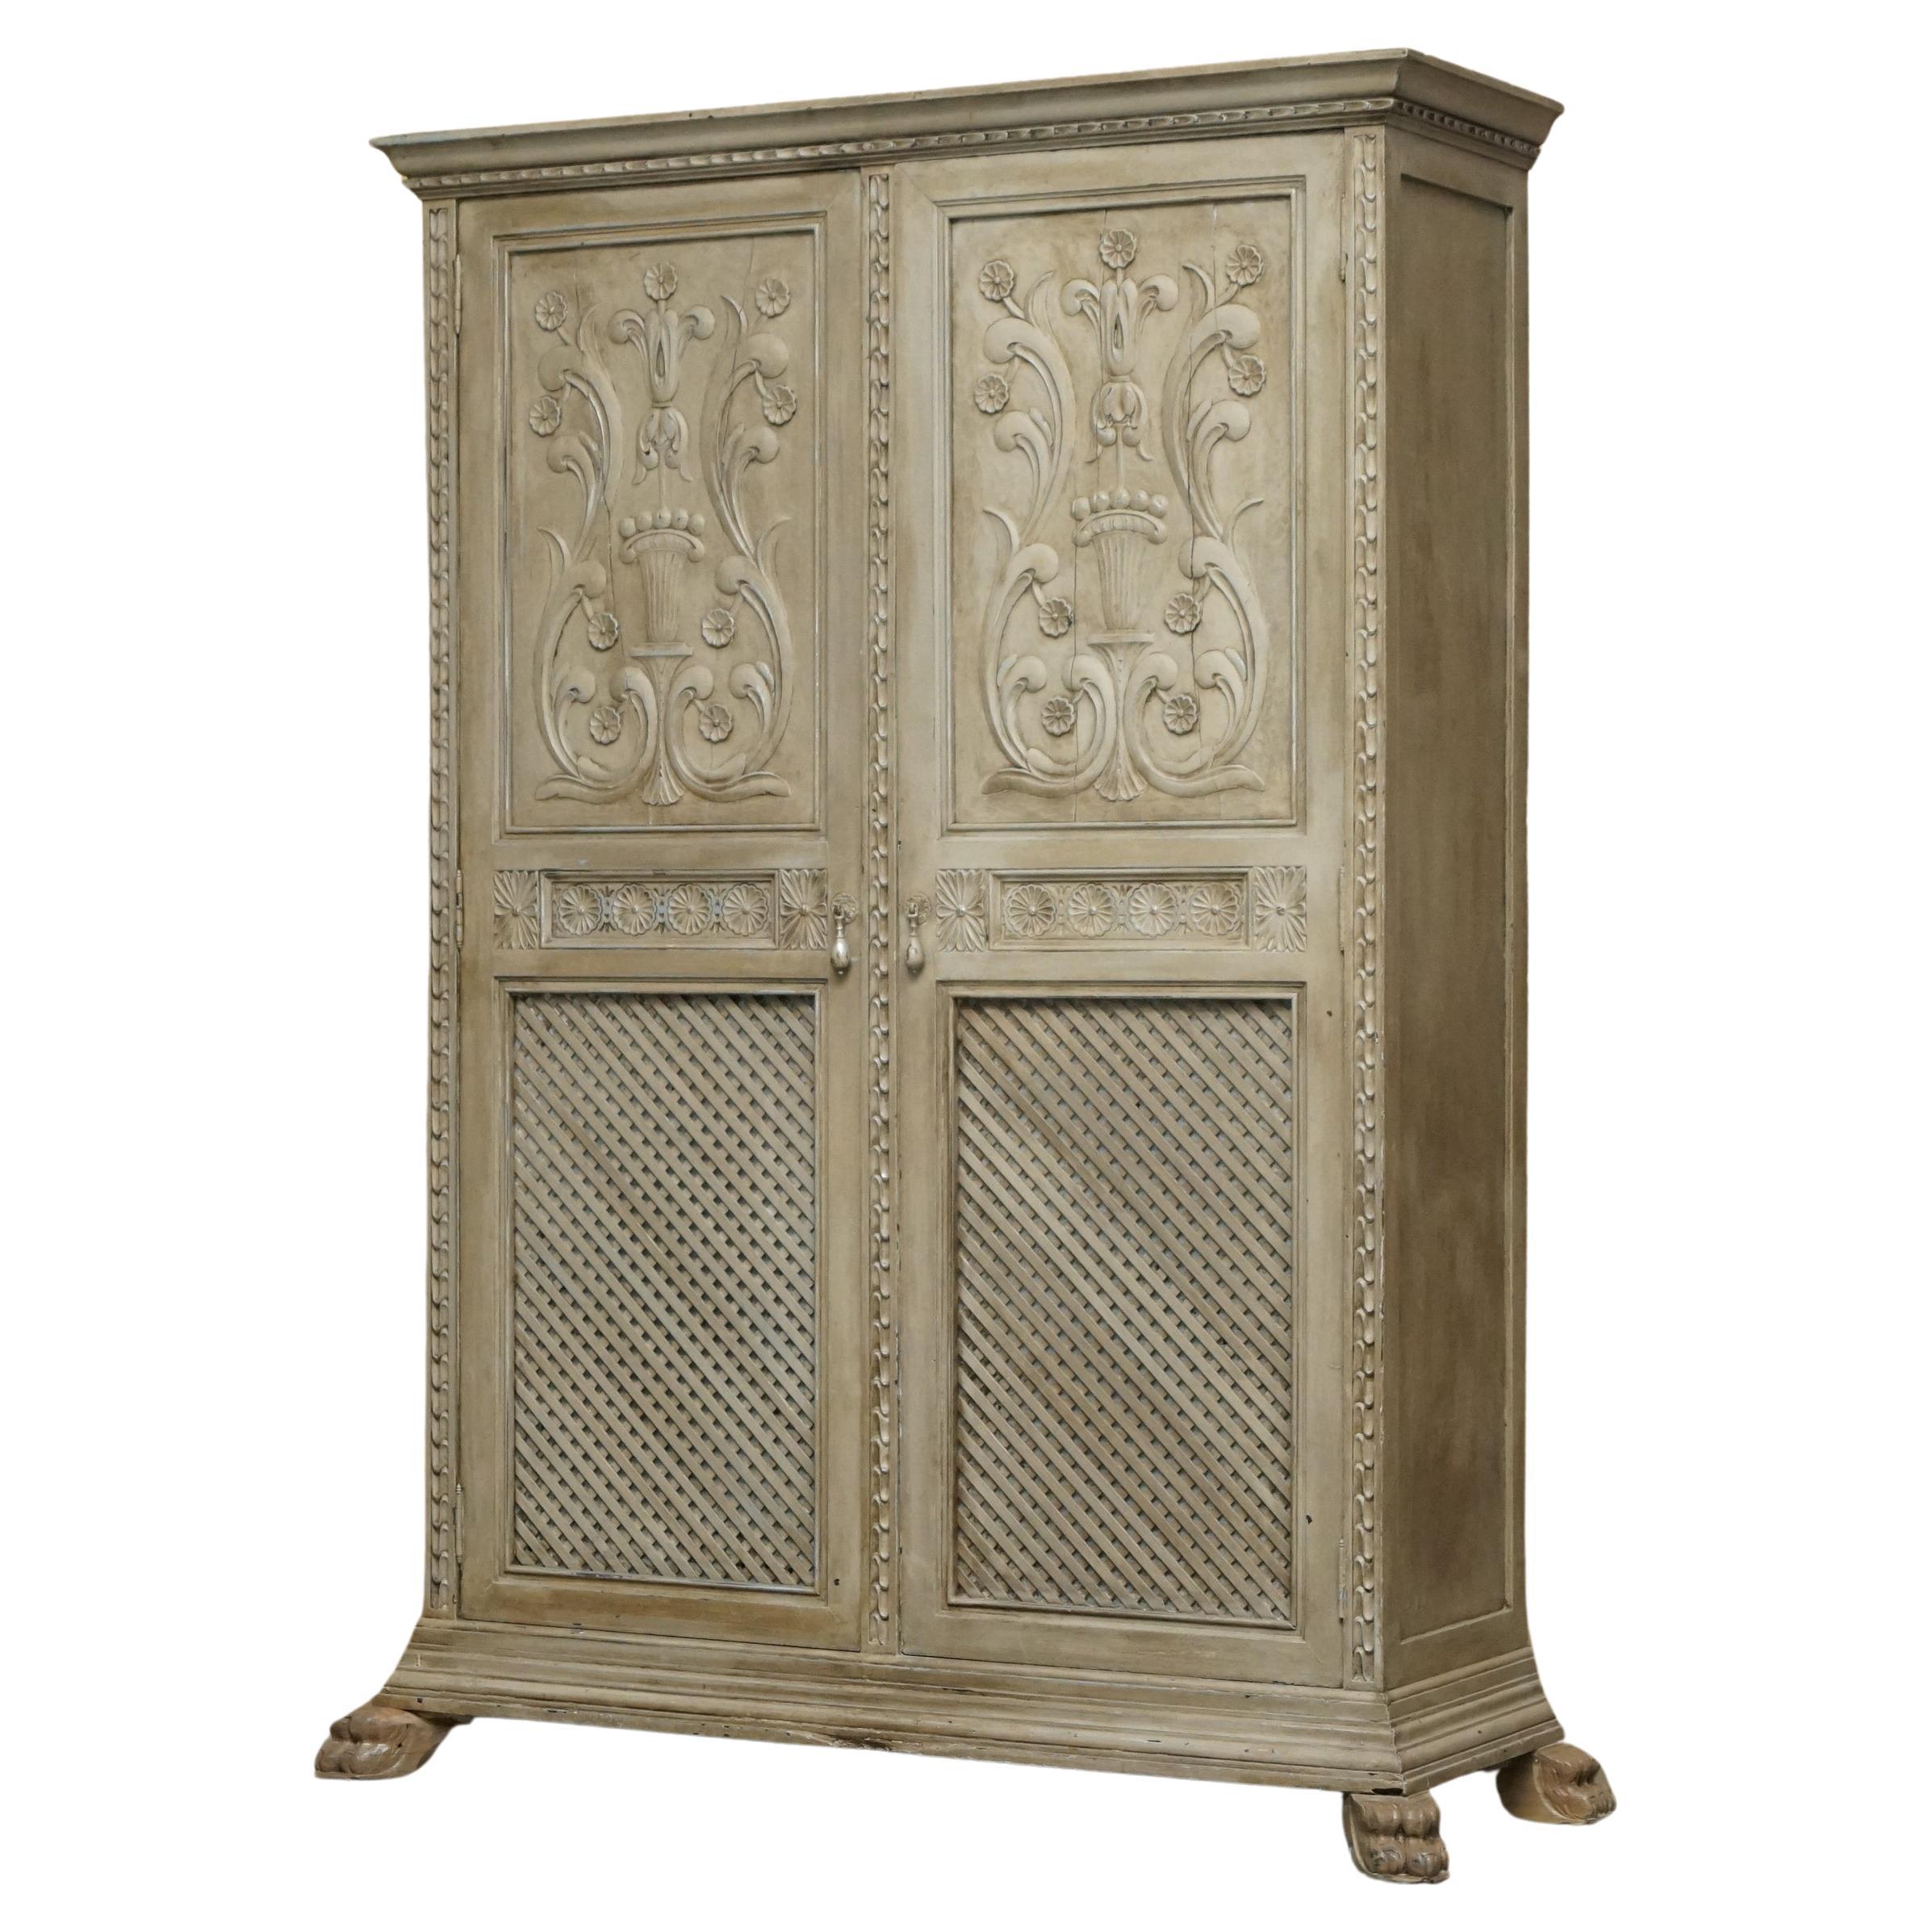 Royal House Antiques

Royal House Antiques is delighted to offer for sale this stunning, original circa 1840-1860 Jacobean Revival hand painted French Armoire Wardrobe 

Please note the delivery fee listed is just a guide, it covers within the M25